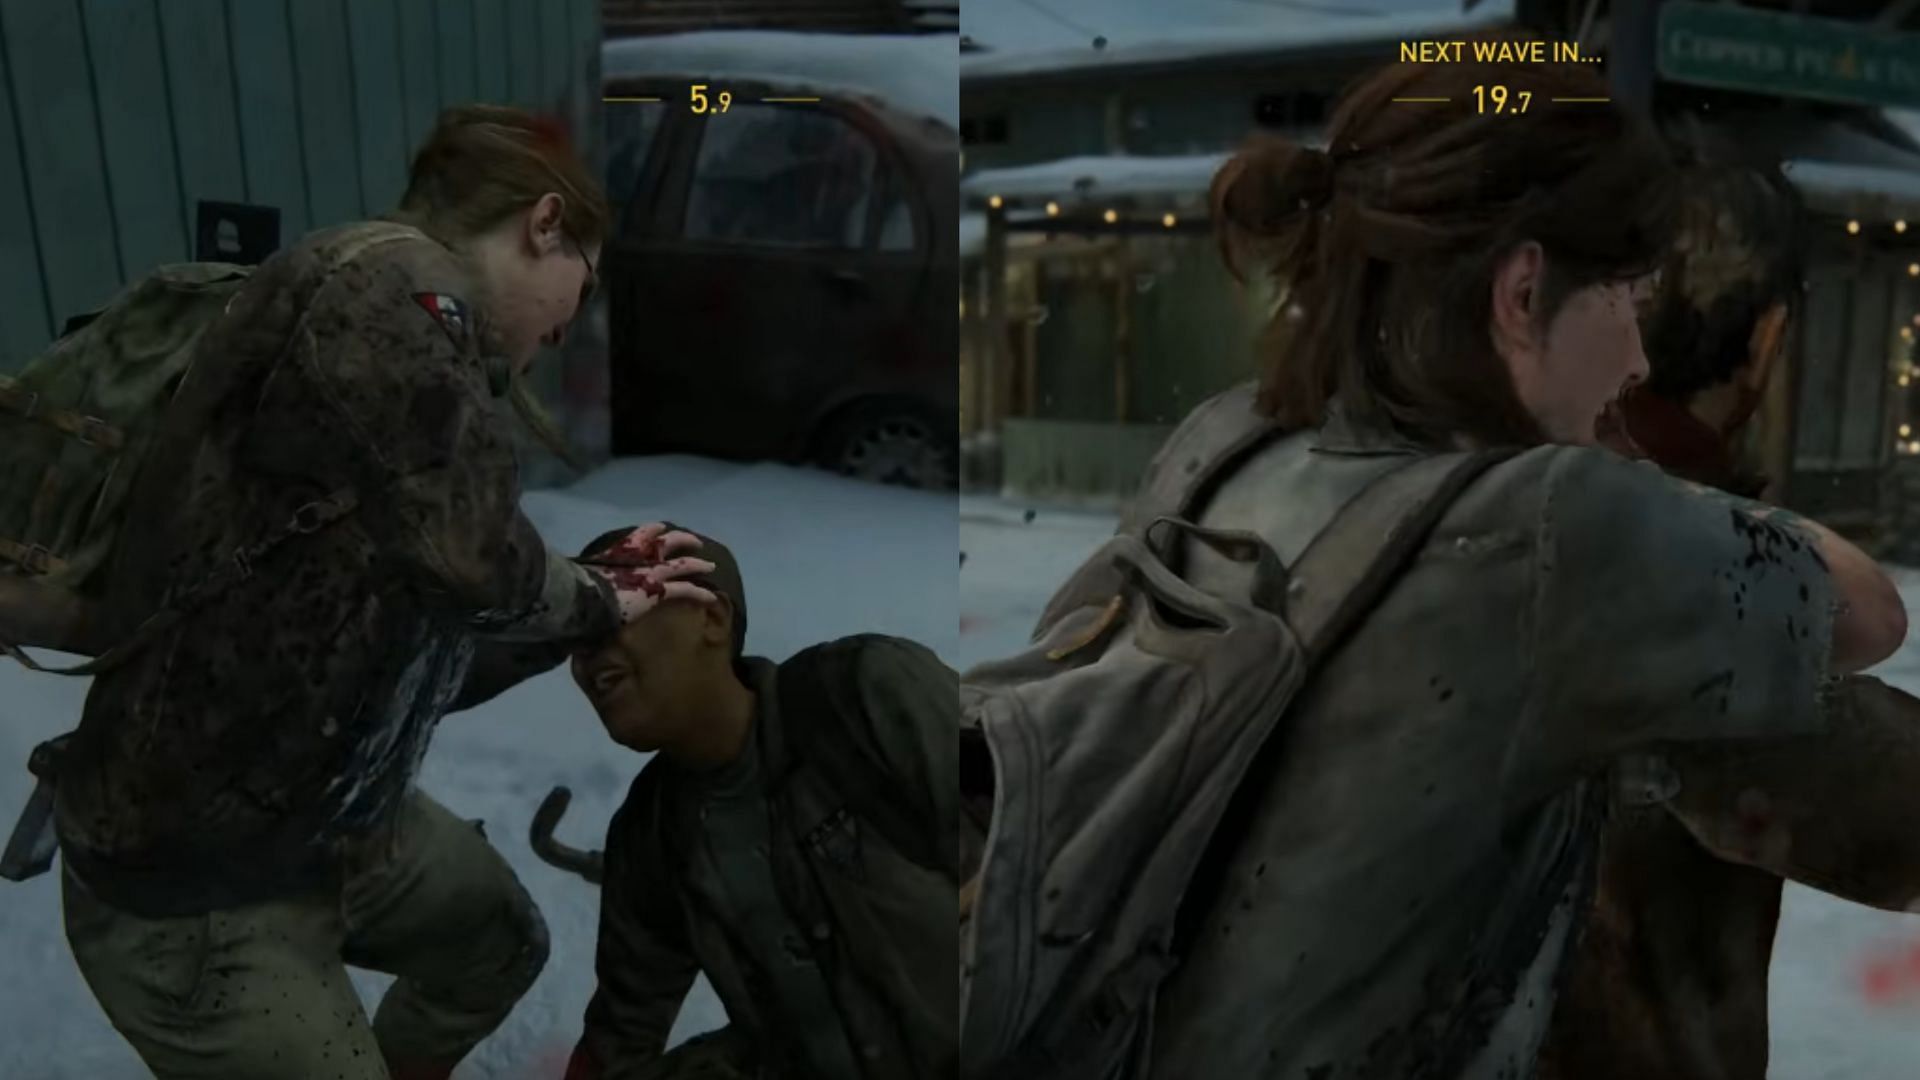 The Last of Us Part 2 No Return provides a diverse set of playable characters